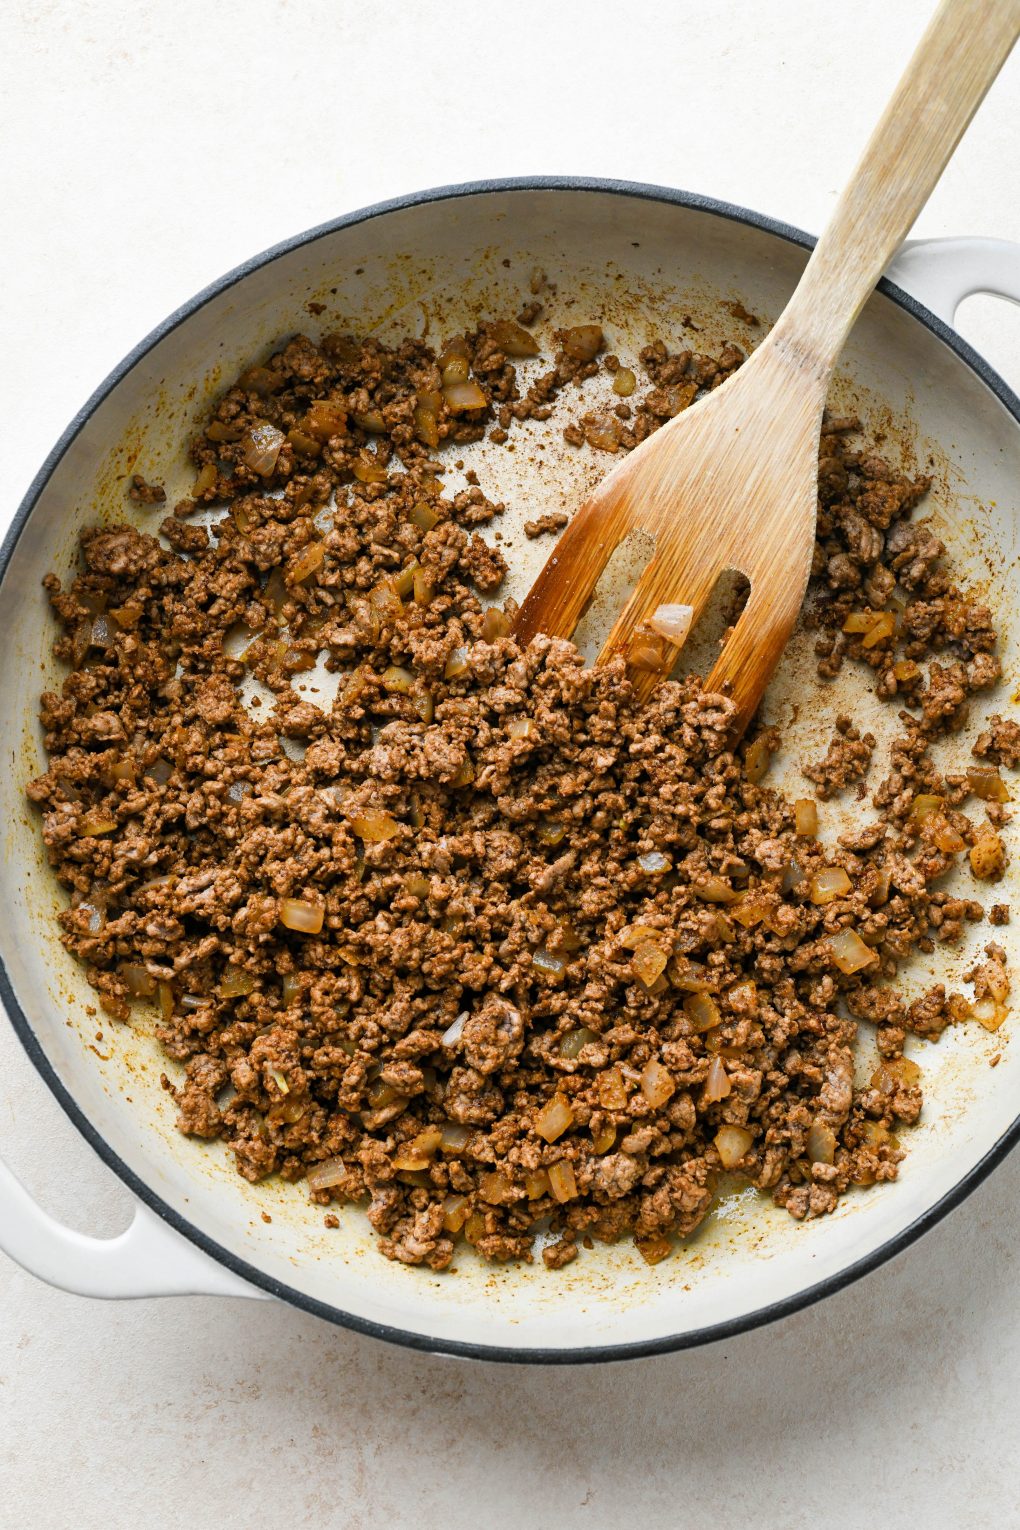 How to make Dairy Free Queso Fundido with Ground Beef: Cooked ground beef and onion in skillet with spices mixed in.